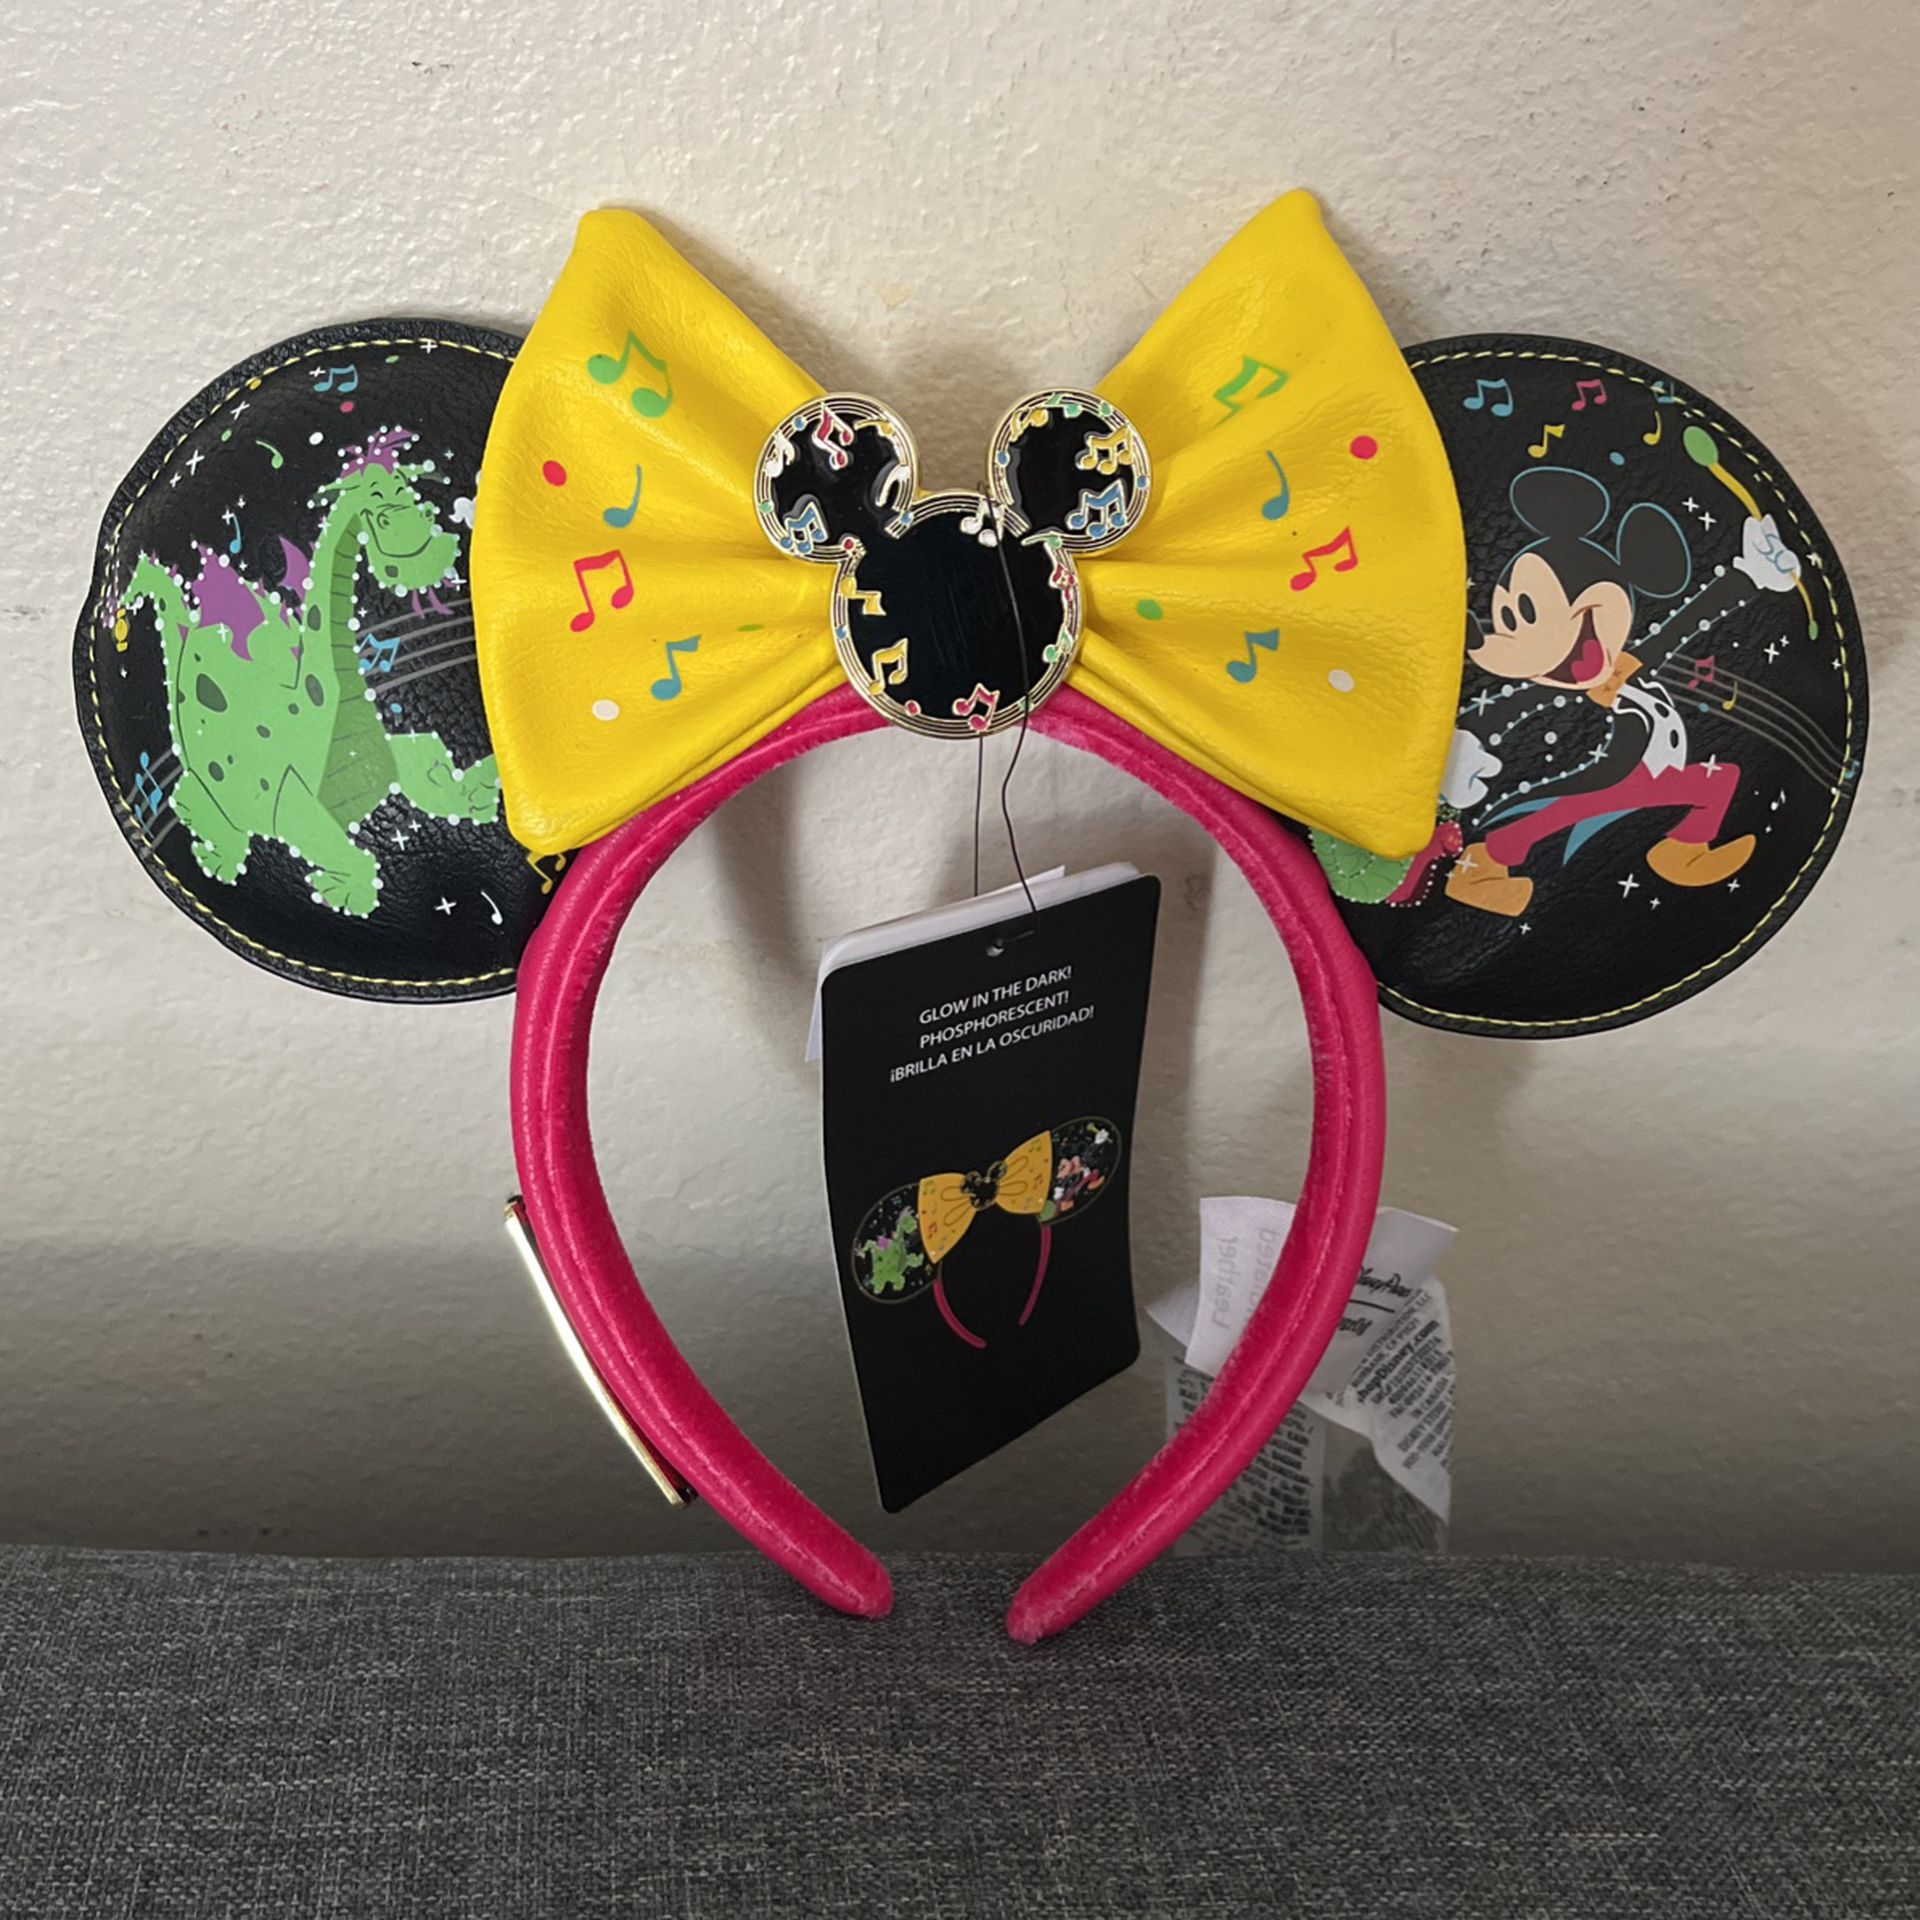 Disneyland Mickey Ears Electrical Parade Loungefly 